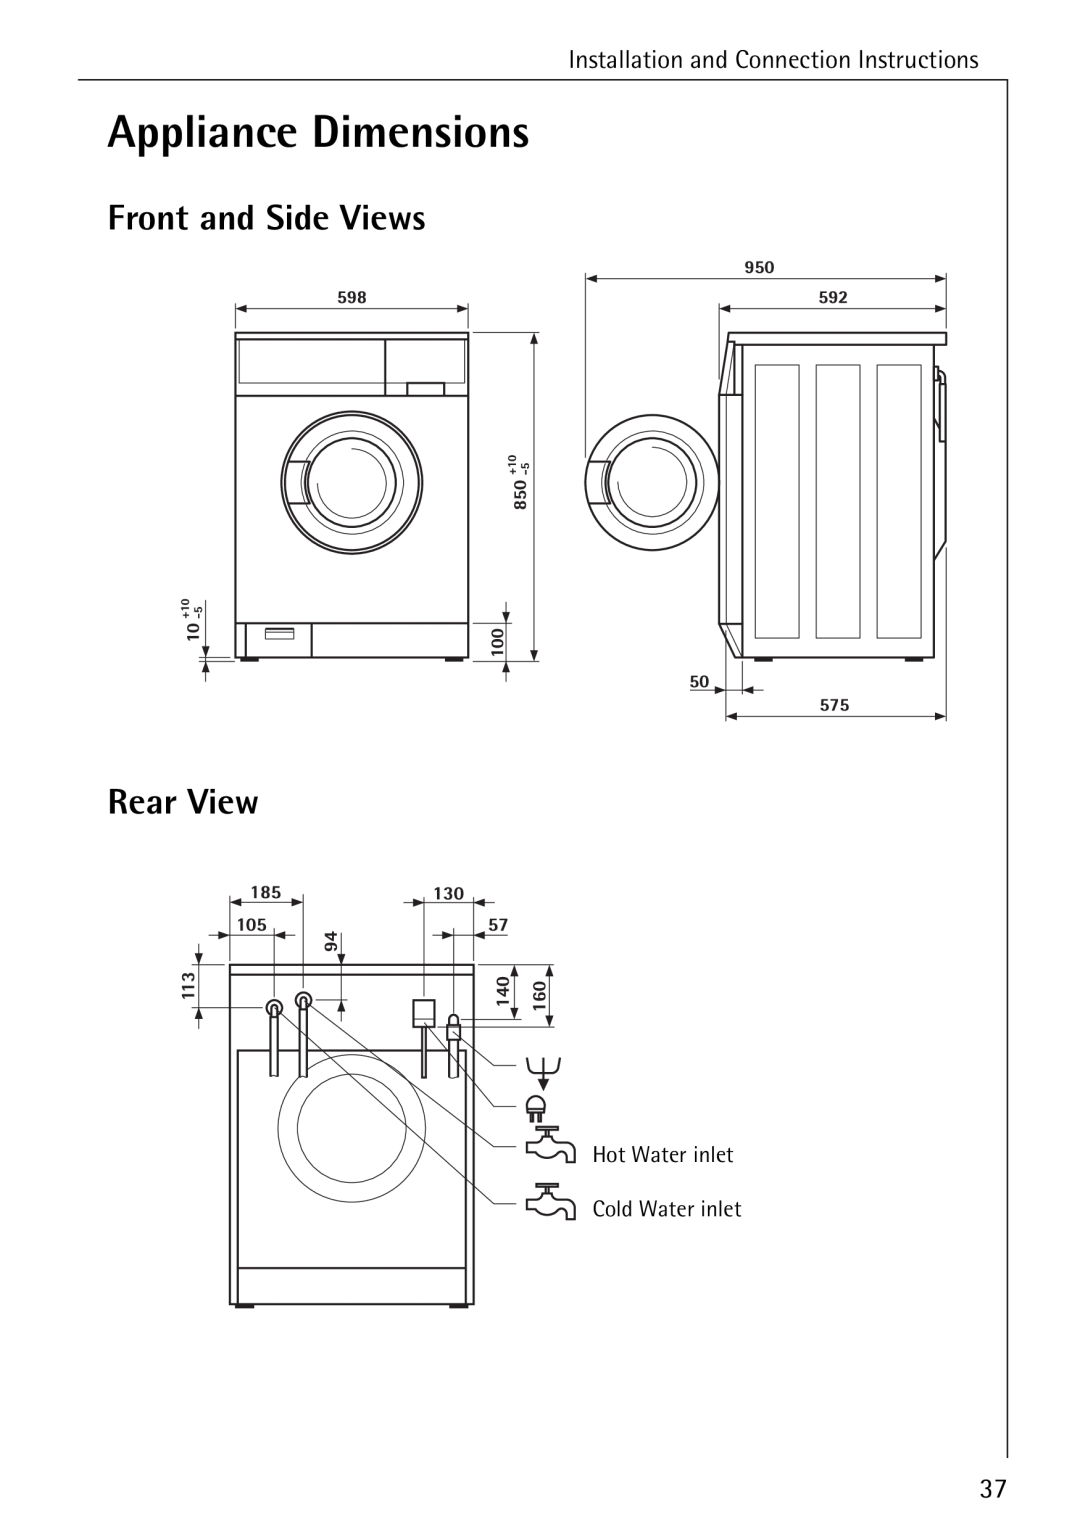 Electrolux LAVAMAT 50720 manual Appliance Dimensions, Front and Side Views, Rear View 